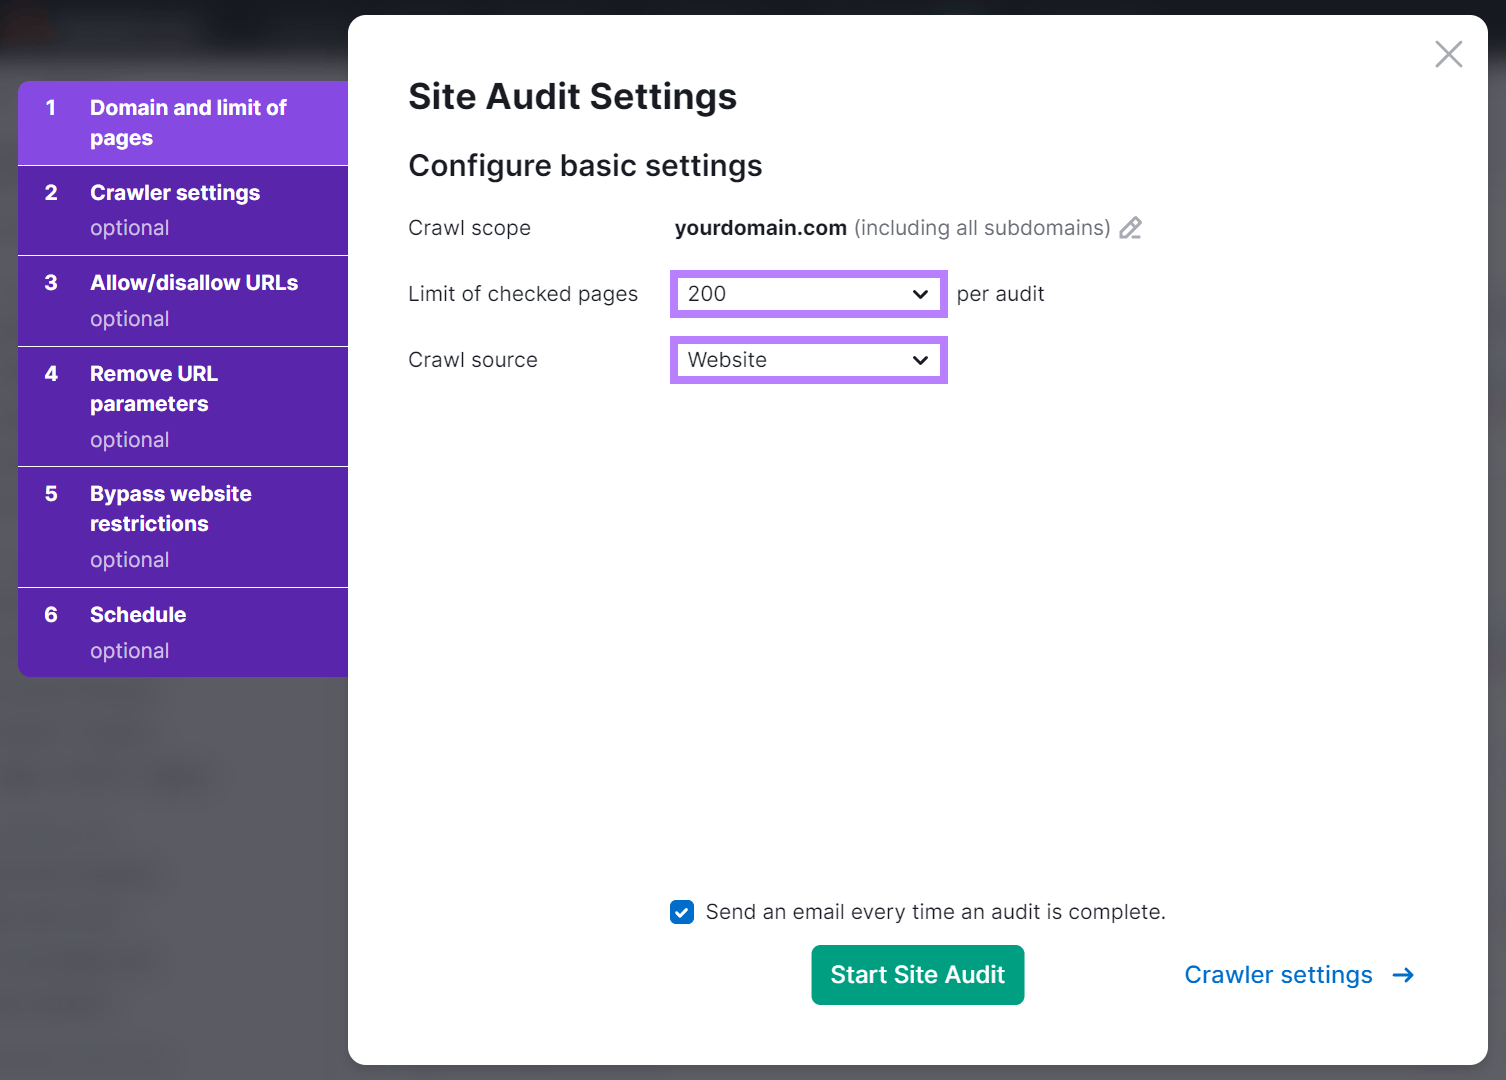 Site Audit settings conifguration popup with Limit of checked pages and Crawl source settings highlighted.